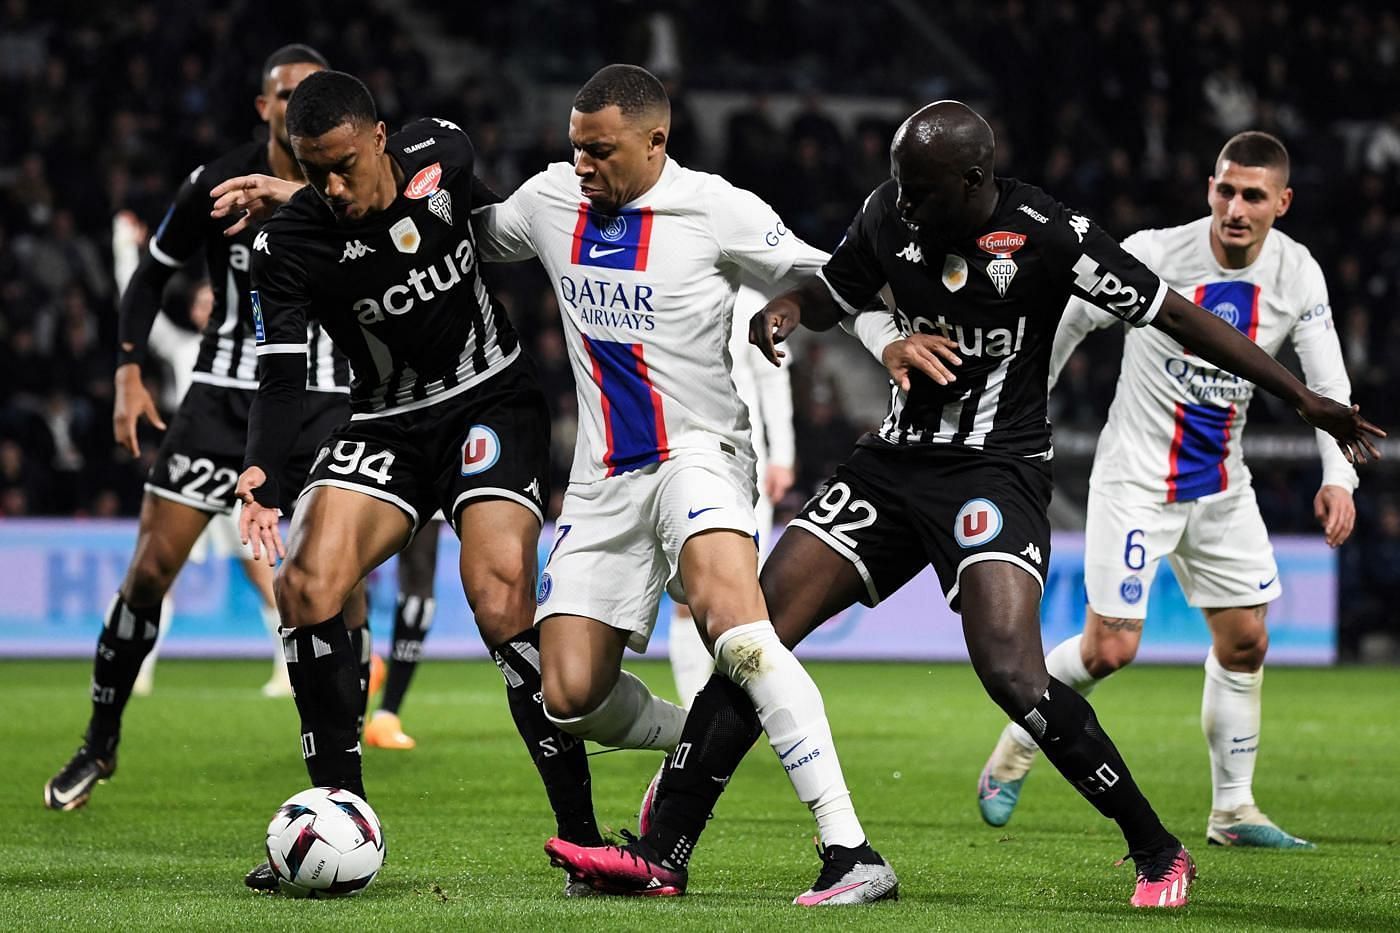 The Parisians moved 11 points clear at the top